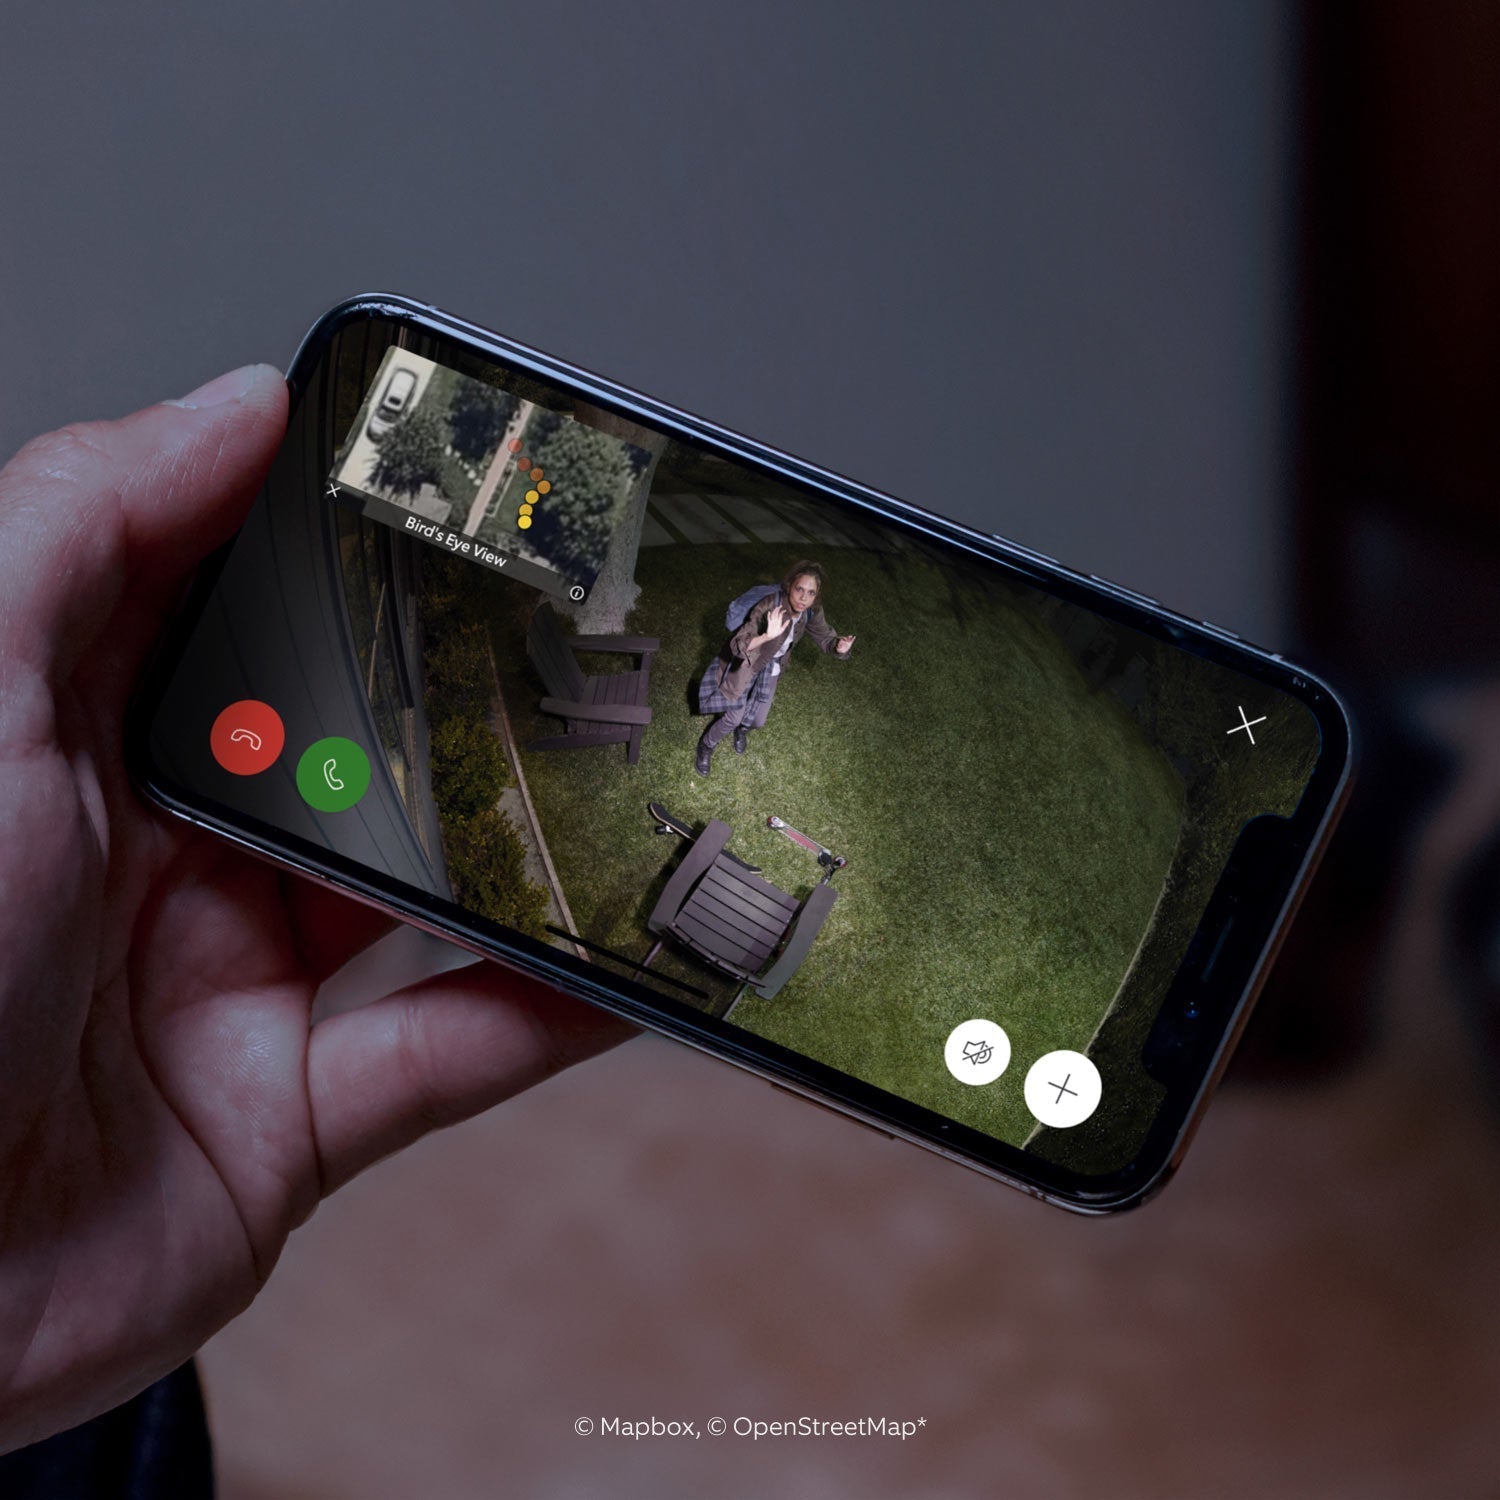 Spotlight Cam Pro (Battery) - Close-up of smartphone showing video of a person in a yard, looking up into Spotlight Cam Pro camera. Inset is bird's eye view perspective.